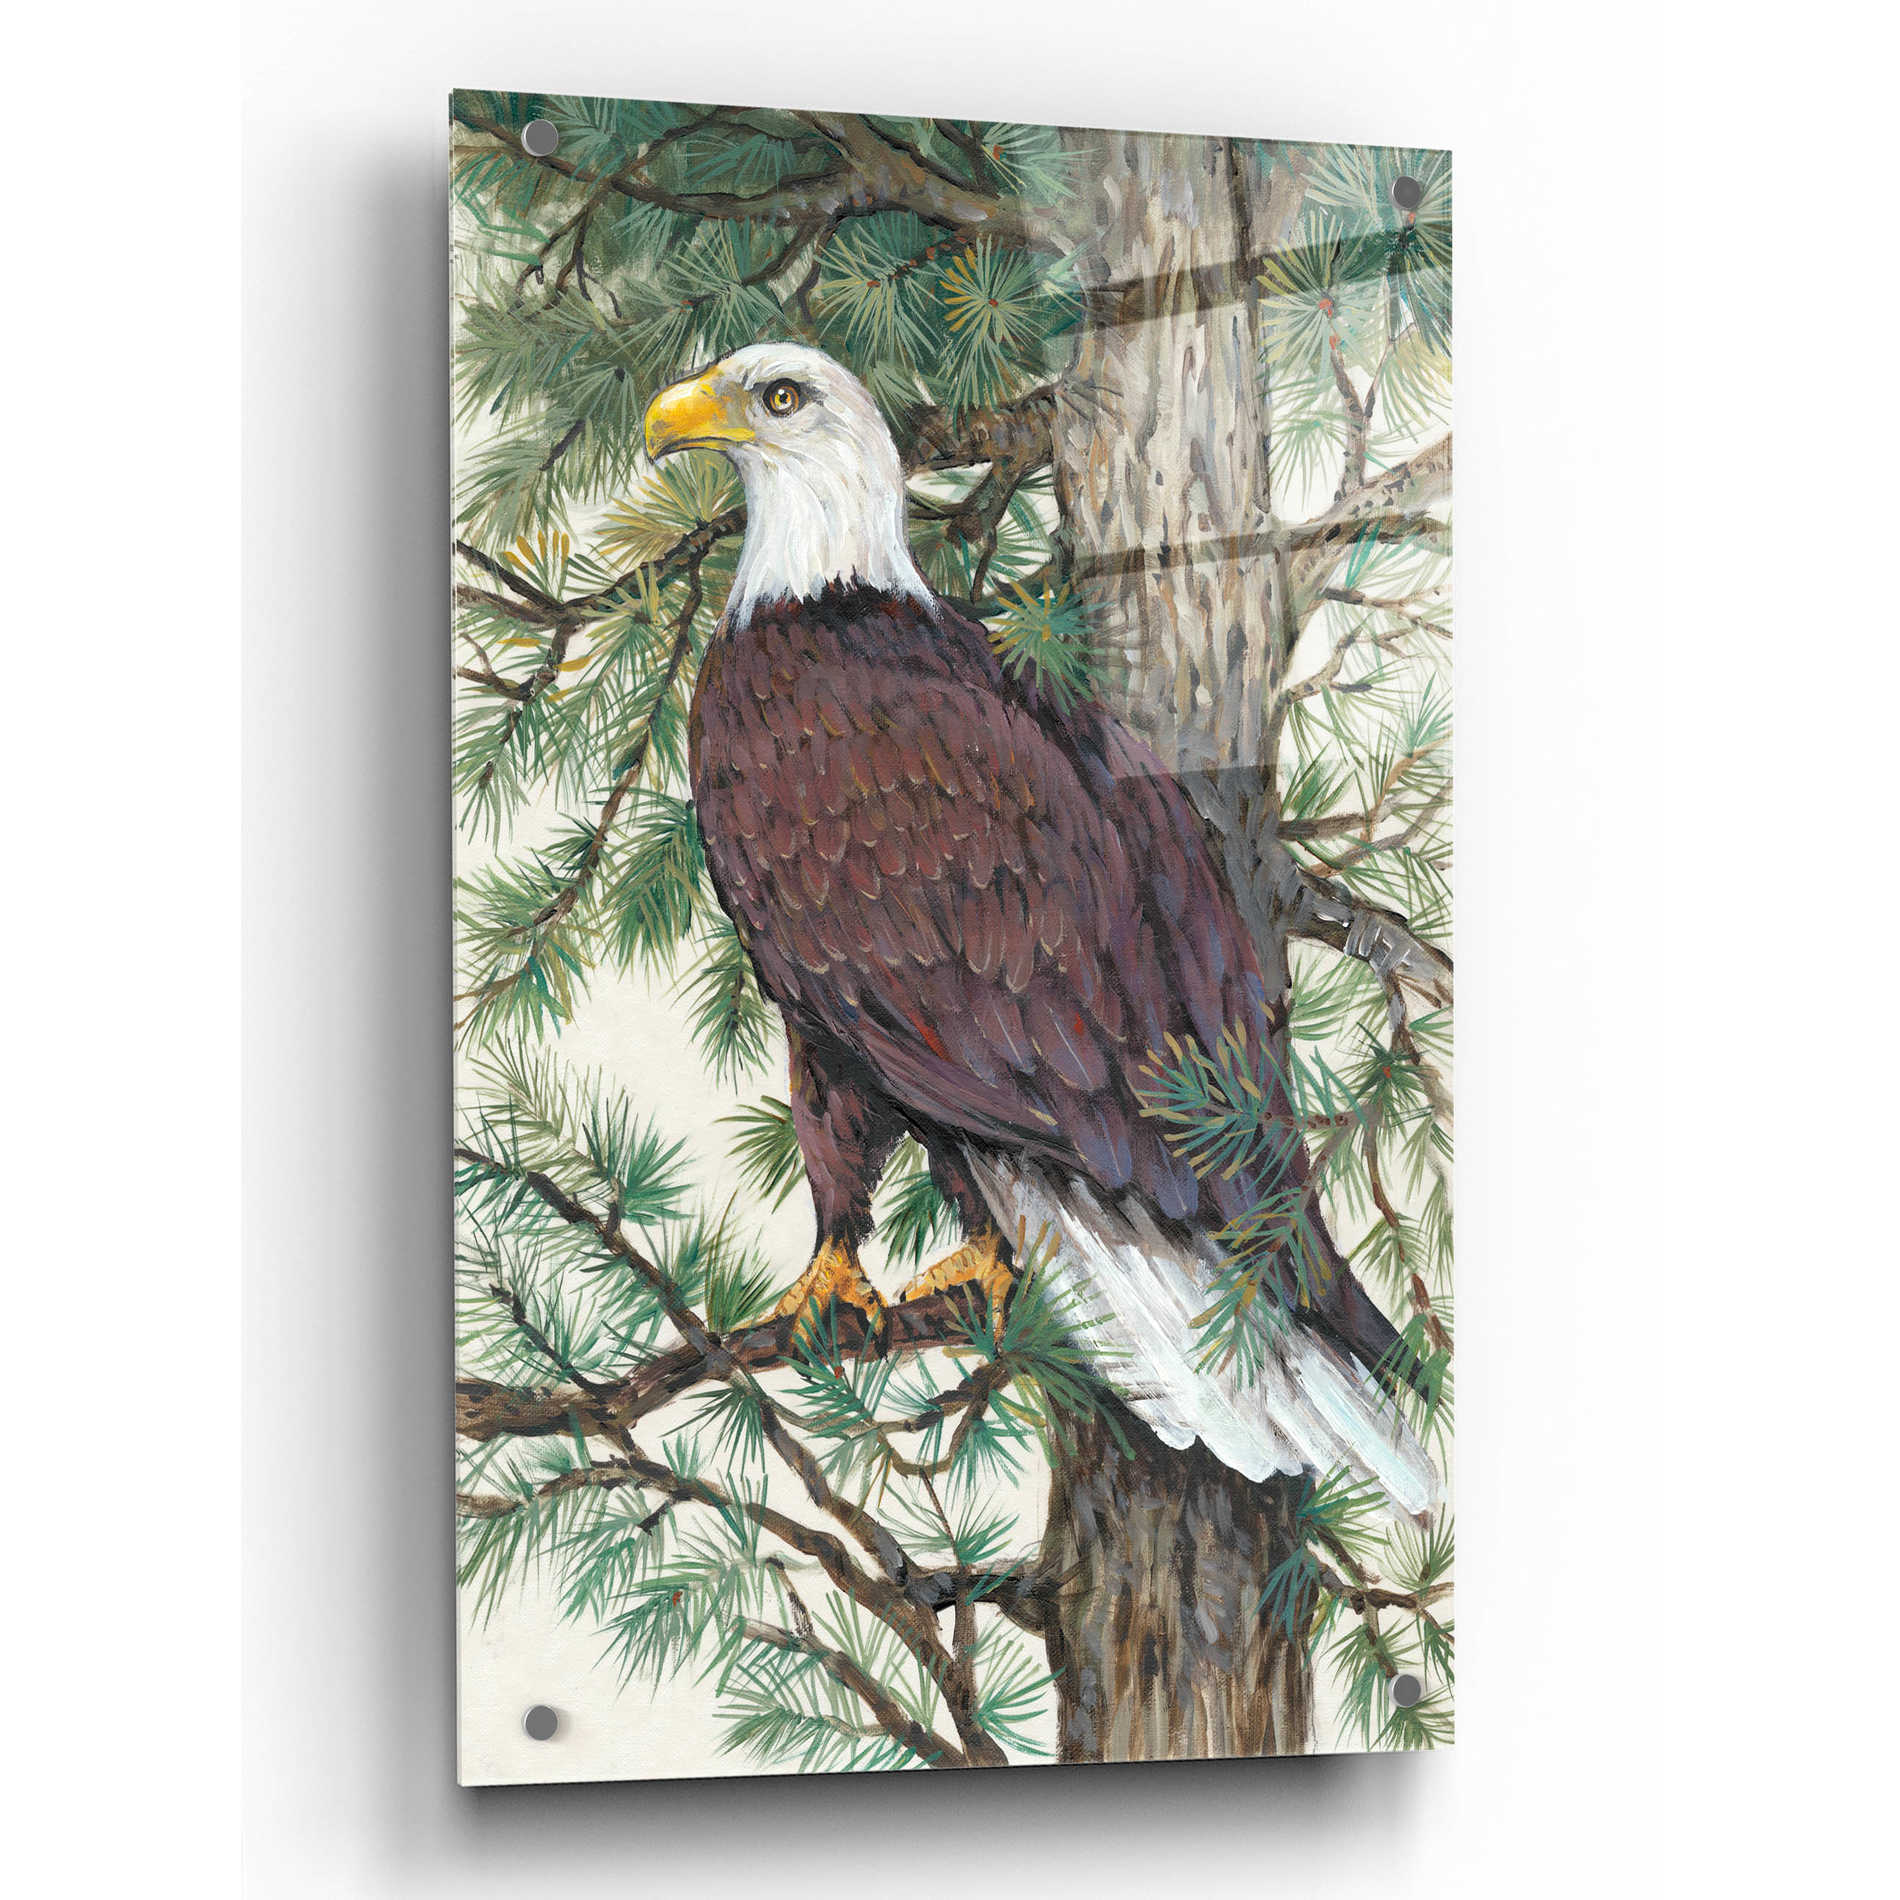 Epic Art 'Eagle in the Pine' by Tim O'Toole, Acrylic Glass Wall Art,24x36